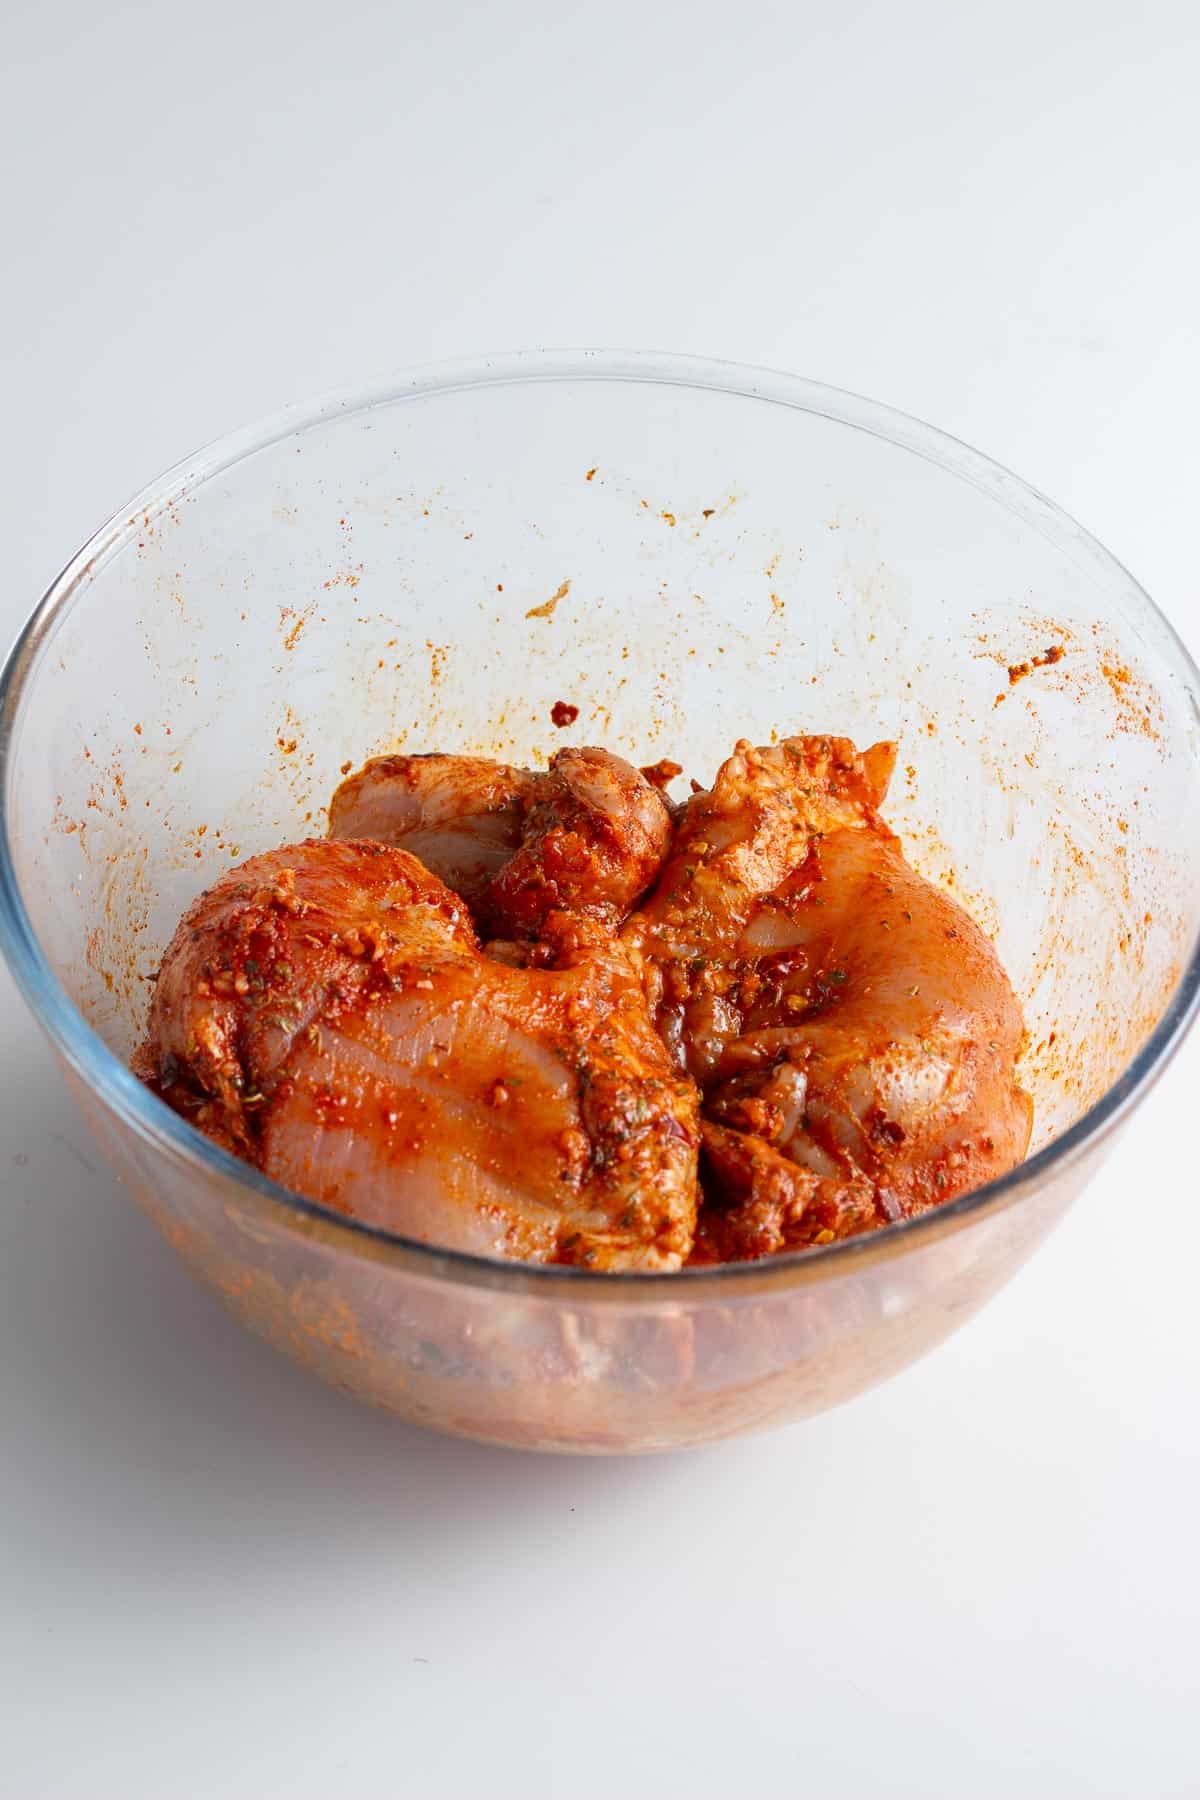 Glass bowl of chicken in marinade